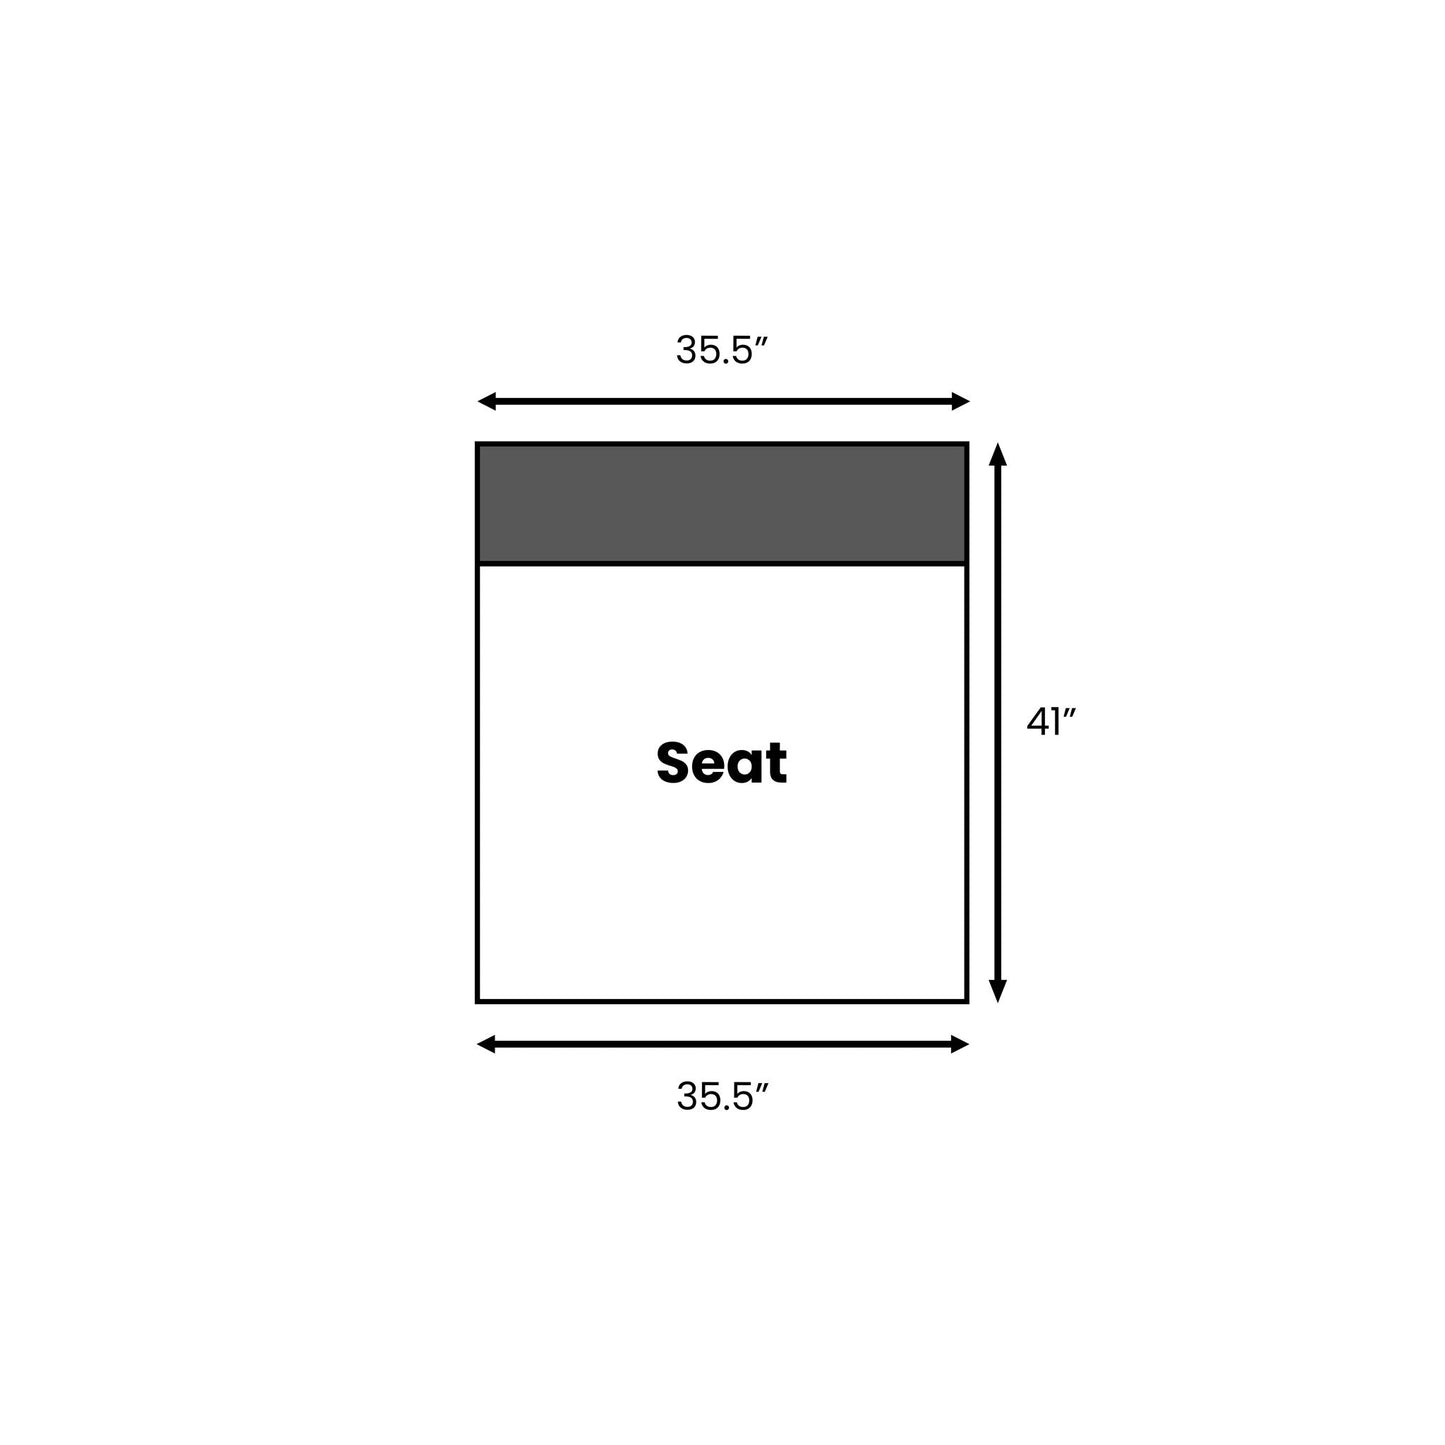 Dimensions of the Rezy Sofa Seat add-on